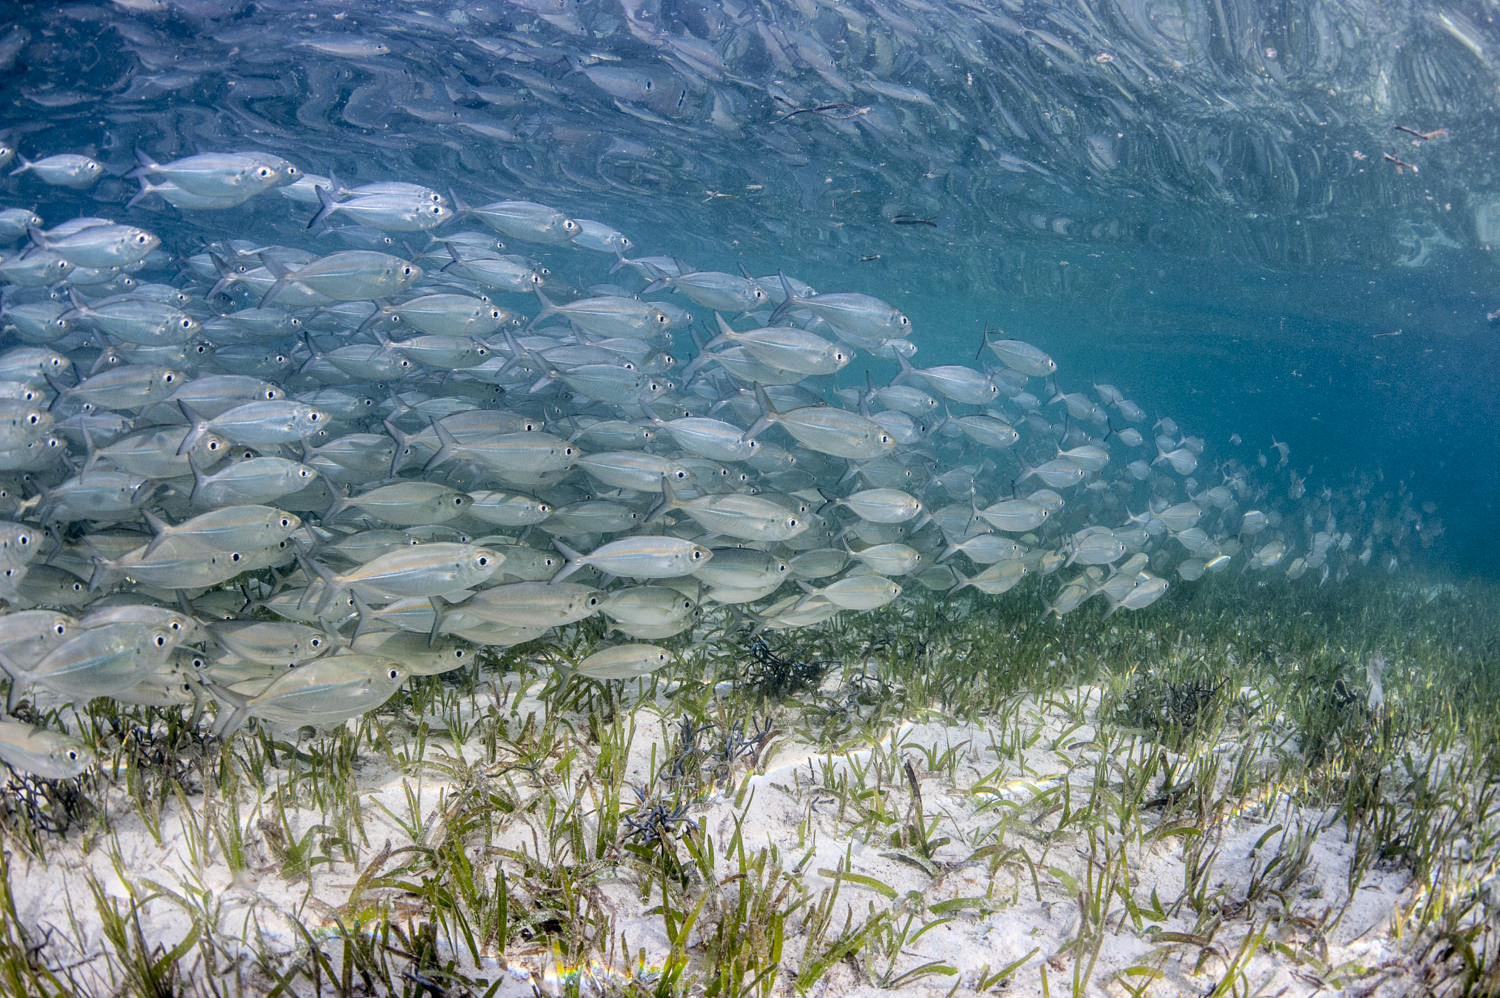 There are more than 700 species of fish in the Bird's Head Seascape